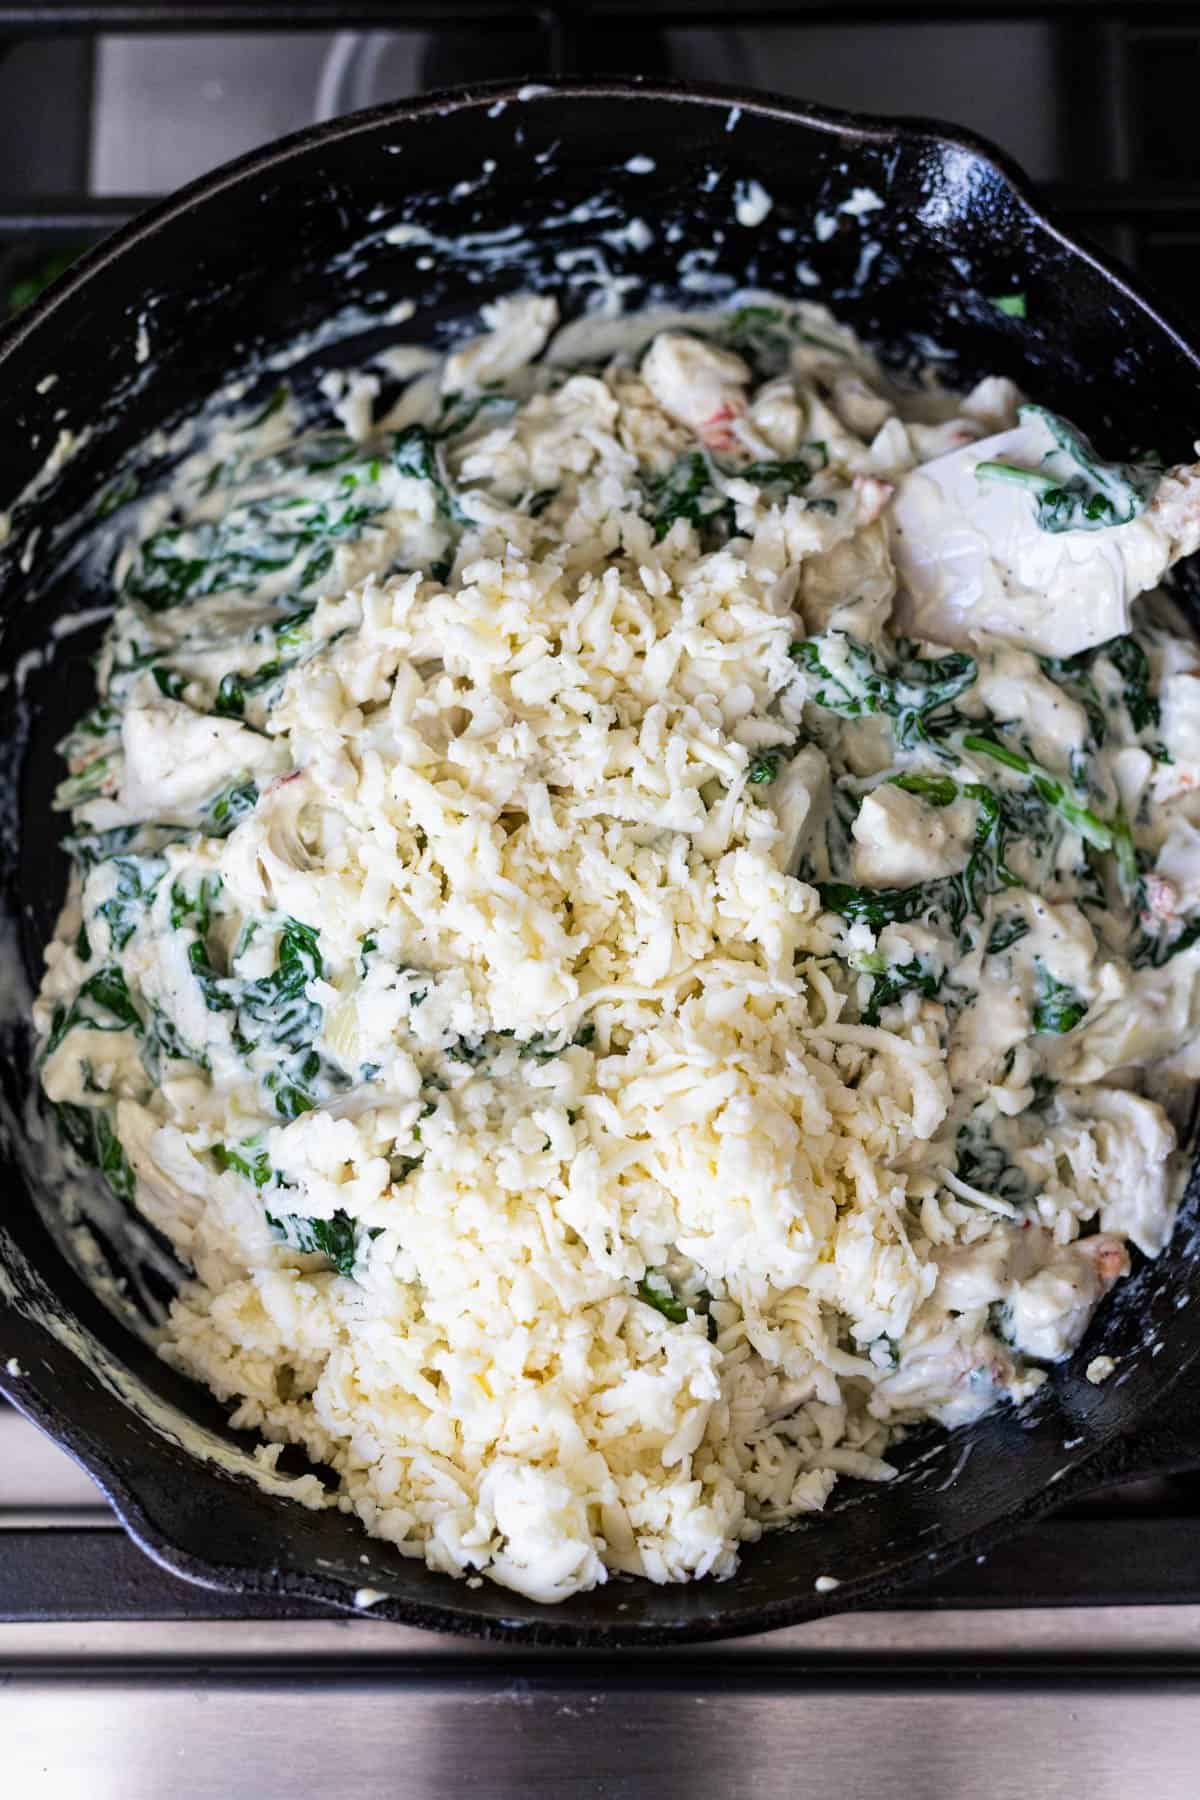 shredded mozzarella cheese added to the skillet of spinach and crab dip